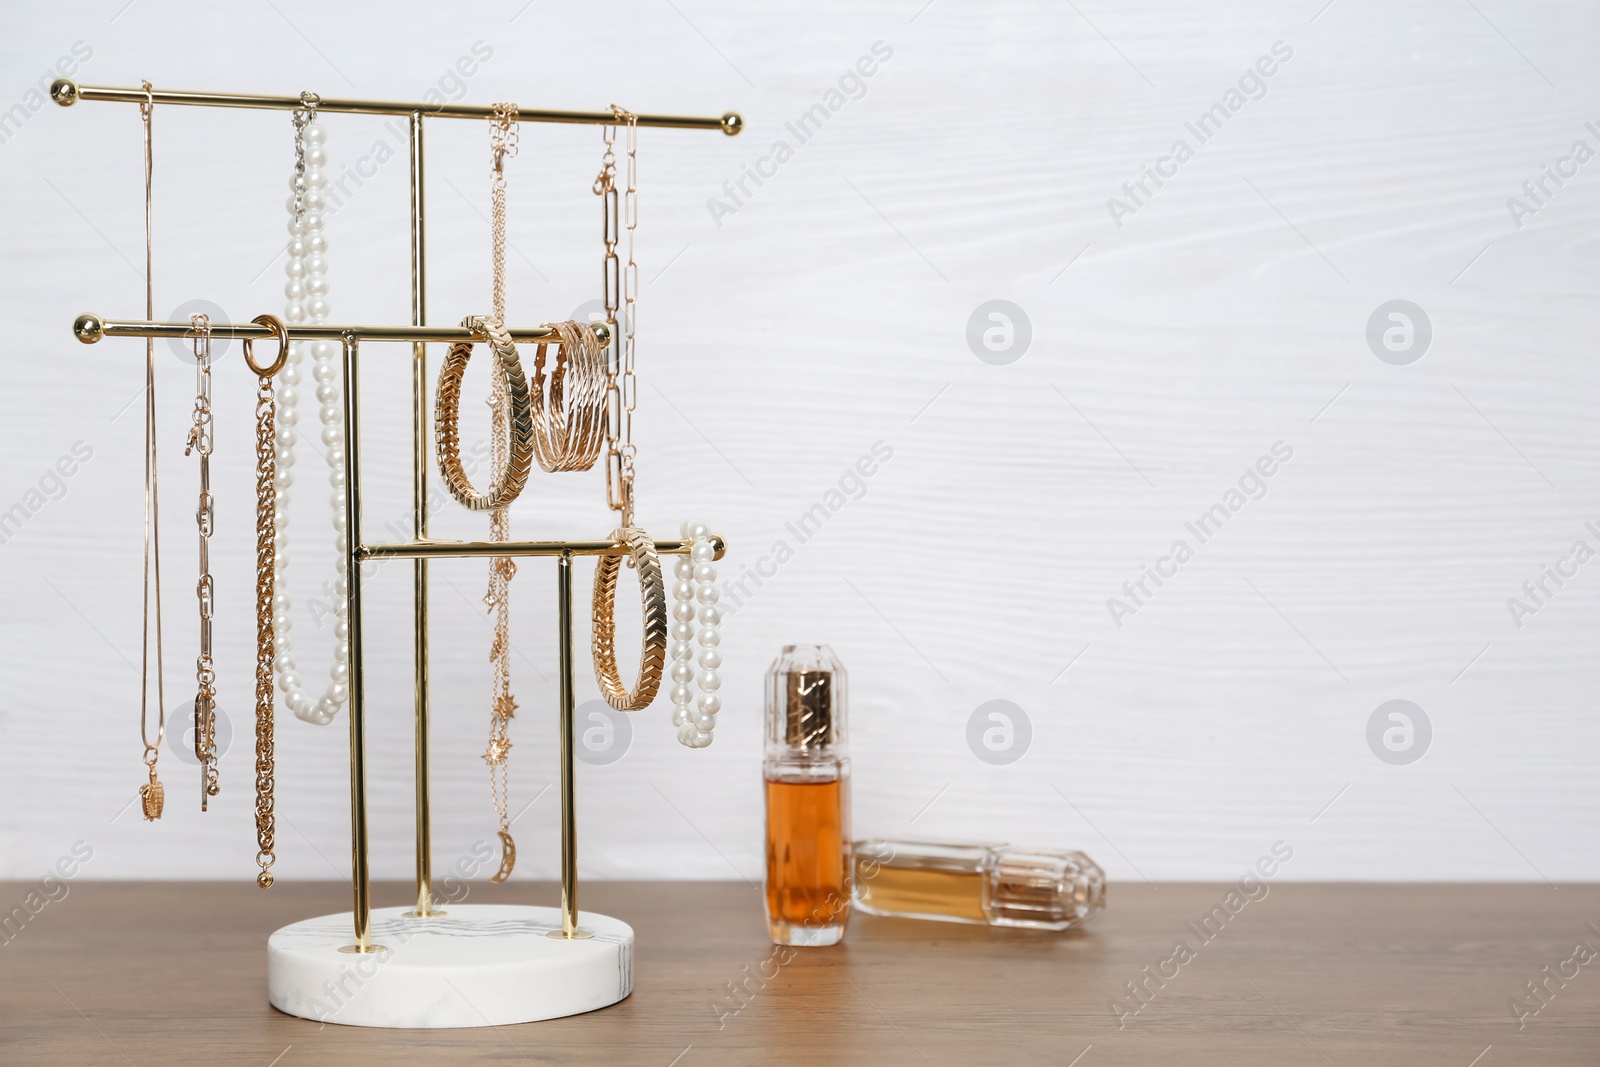 Photo of Holder with set of luxurious jewelry and perfumes on wooden table. Space for text